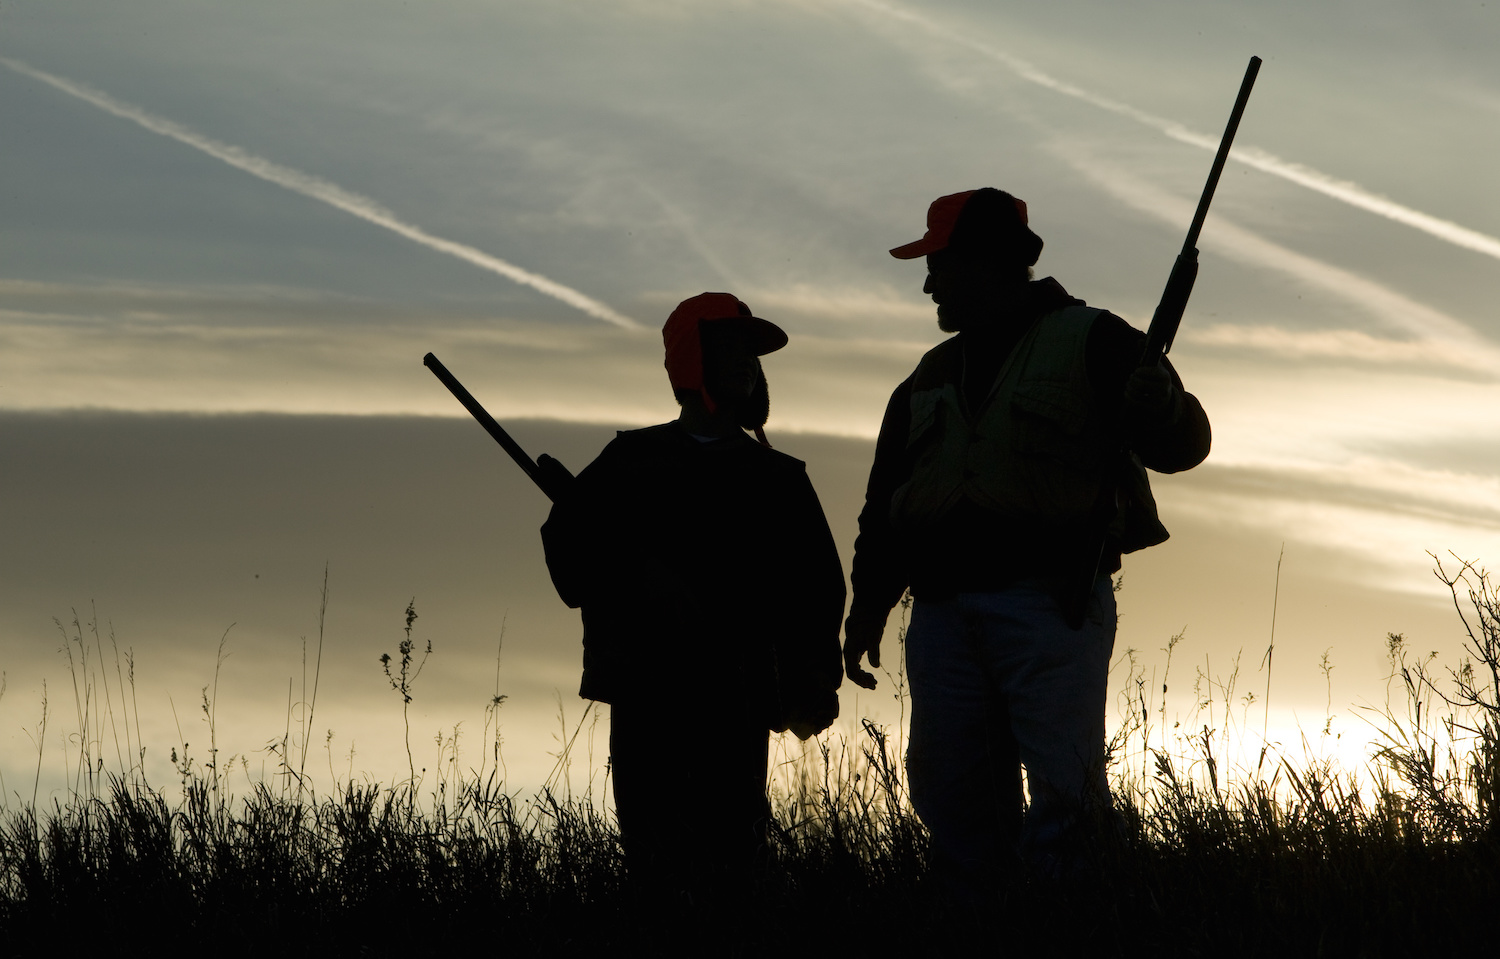 Passing down yesterday’s traditions today creates the hunters of tomorrow